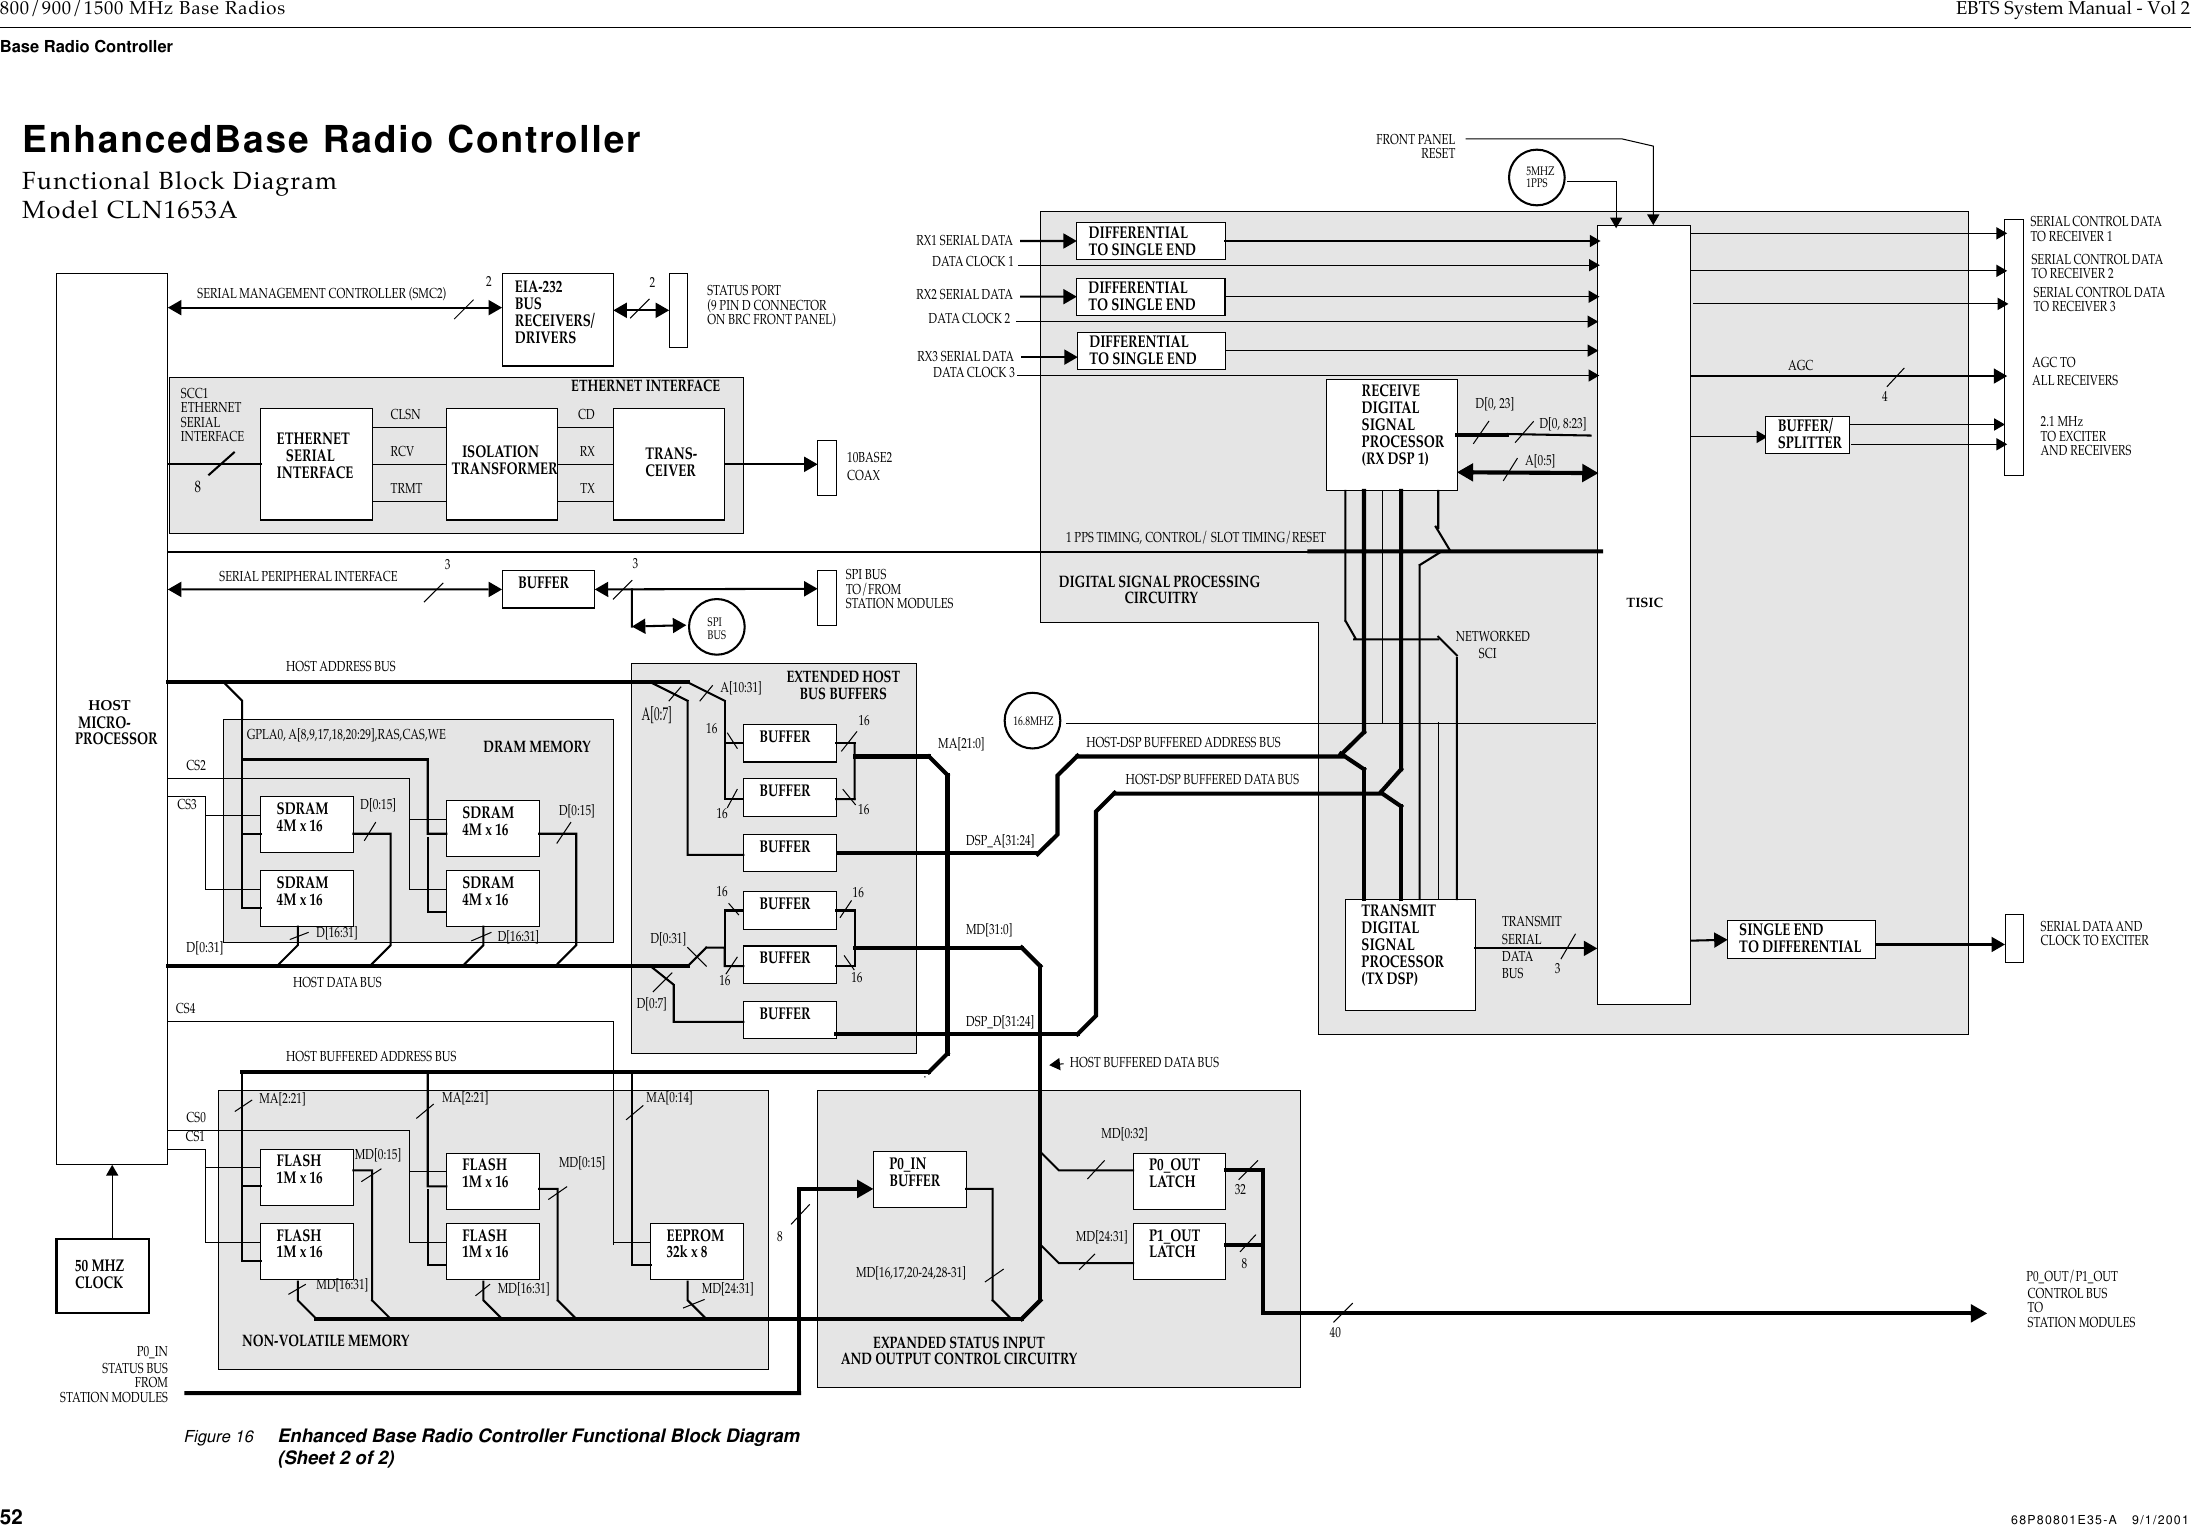 52 68P80801E35-A   9/1/2001 800/900/1500 MHz Base Radios EBTS System Manual - Vol 2Base Radio Controller  Figure 16 Enhanced Base Radio Controller Functional Block Diagram (Sheet 2 of 2)EnhancedBase Radio ControllerFunctional Block DiagramModel CLN1653AHOSTMICRO-ETHERNETSERIALINTERFACETRANS-CDRCV RXTRMT TXCLSN10BASE2COAXETHERNETSERIALINTERFACECEIVERISOLATIONTRANSFORMERPROCESSORSCC18SDRAM4M x 16SDRAM4M x 16SDRAM4M x 16SDRAM4M x 16GPLA0, A[8,9,17,18,20:29],RAS,CAS,WECS2CS3D[0:31]D[0:15]D[16:31]D[0:15]D[16:31]BUFFERBUFFERBUFFERBUFFERBUFFERBUFFERD[0:31]D[0:7]A[10:31]MA[21:0]DSP_D[31:24]A[0:7]DSP_A[31:24]MD[31:0]EIA-232BUSRECEIVERS/DRIVERS2STATUS PORT(9 PIN D CONNECTORON BRC FRONT PANEL)2BUFFER33SPI BUS TO/FROM STATION MODULESFLASH1M x 16FLASH1M x 16FLASH1M x 16FLASH1M x 16CS0CS1MD[0:15]MD[16:31]MD[0:15]MD[16:31]1616161616 161616MA[2:21]MA[2:21]EEPROM32k x 8MD[24:31]MA[0:14]CS4P1_OUTLATCHP0_OUTLATCHMD[0:32]MD[24:31]P0_INBUFFERMD[16,17,20-24,28-31]STATUS BUSFROMSTATION MODULESP0_IN8CONTROL BUSTOSTATION MODULESP0_OUT/P1_OUT328TRANSMITDIGITALSIGNALPROCESSOR(TX DSP)SINGLE ENDTO DIFFERENTIALSERIAL DATA ANDCLOCK TO EXCITERDIFFERENTIALTO SINGLE ENDRX1 SERIAL DATARECEIVEDIGITALSIGNALPROCESSOR(RX DSP 1)TISICA[0:5]D[0, 8:23]D[0, 23]SERIAL CONTROL DATATO RECEIVER 12.1 MHz1 PPS TIMING, CONTROL/ SLOT TIMING/RESETNETWORKEDSCI16.8MHZSPIBUSDIGITAL SIGNAL PROCESSING CIRCUITRYDIFFERENTIALTO SINGLE ENDDIFFERENTIALTO SINGLE END50 MHZCLOCKFRONT PANELRESETDRAM MEMORYETHERNET INTERFACENON-VOLATILE MEMORY EXPANDED STATUS INPUTAND OUTPUT CONTROL CIRCUITRYEXTENDED HOSTBUS BUFFERS40TO EXCITER5MHZ1PPSRX2 SERIAL DATARX3 SERIAL DATAHOST ADDRESS BUSHOST DATA BUSHOST BUFFERED DATA BUSHOST BUFFERED ADDRESS BUSHOST-DSP BUFFERED DATA BUSHOST-DSP BUFFERED ADDRESS BUSSERIAL MANAGEMENT CONTROLLER (SMC2)SERIAL PERIPHERAL INTERFACEAND RECEIVERSSERIAL CONTROL DATATO RECEIVER 2SERIAL CONTROL DATATO RECEIVER 3BUFFER/SPLITTERTRANSMITSERIALDATA BUS 3AGC4DATA CLOCK 2DATA CLOCK 1DATA CLOCK 3 AGC TOALL RECEIVERS